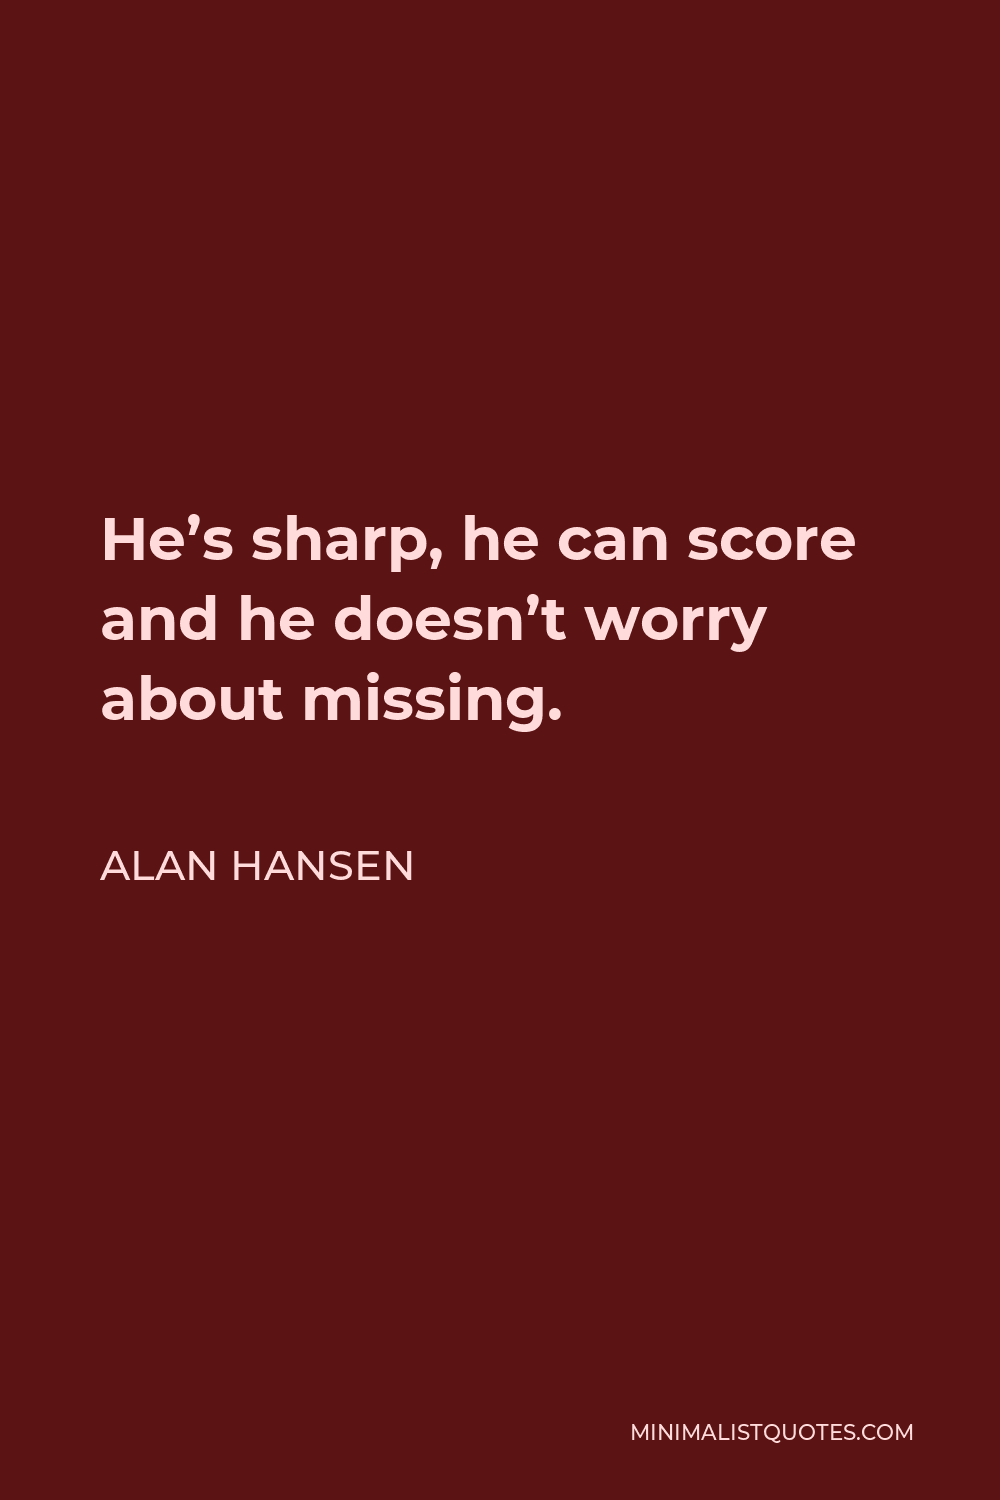 Alan Hansen Quote - He’s sharp, he can score and he doesn’t worry about missing.